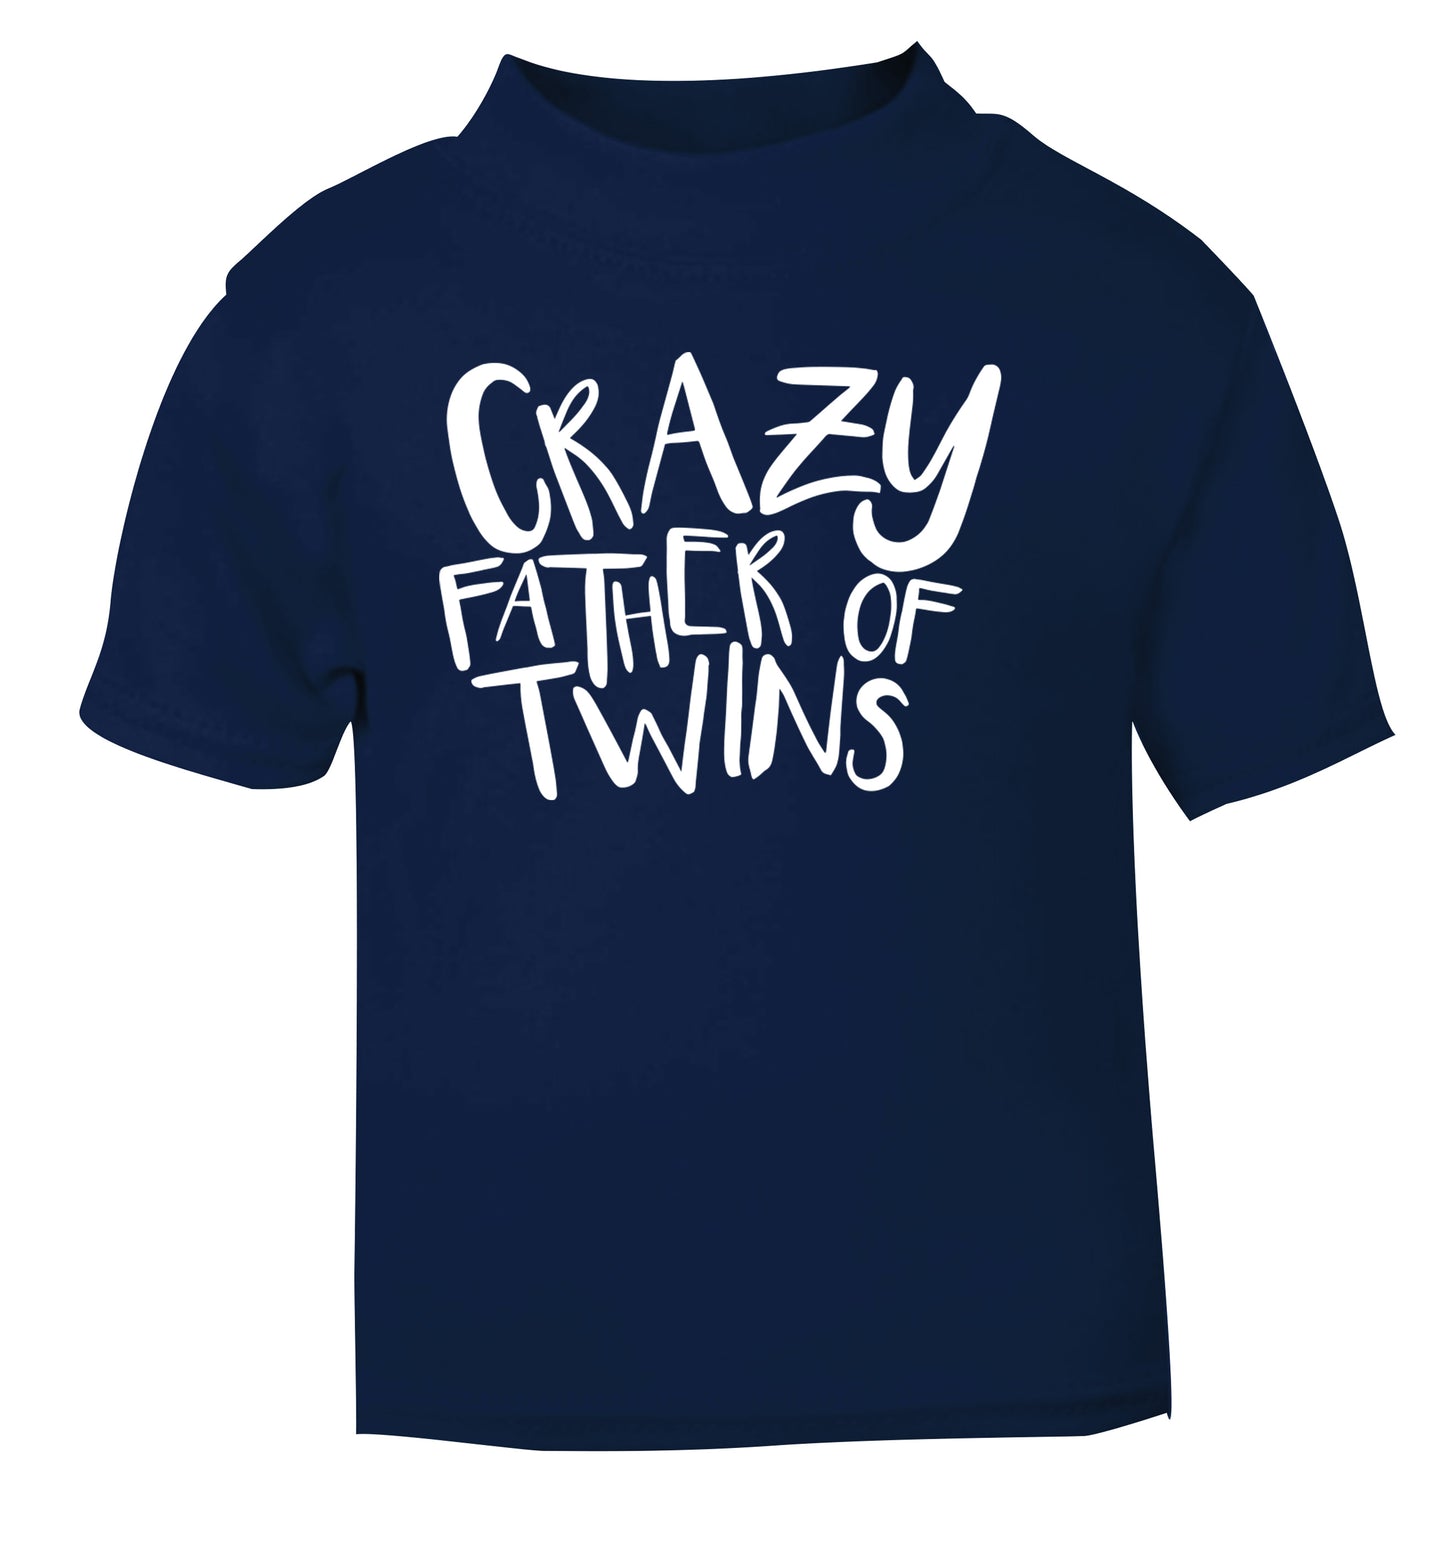 Crazy father of twins navy Baby Toddler Tshirt 2 Years